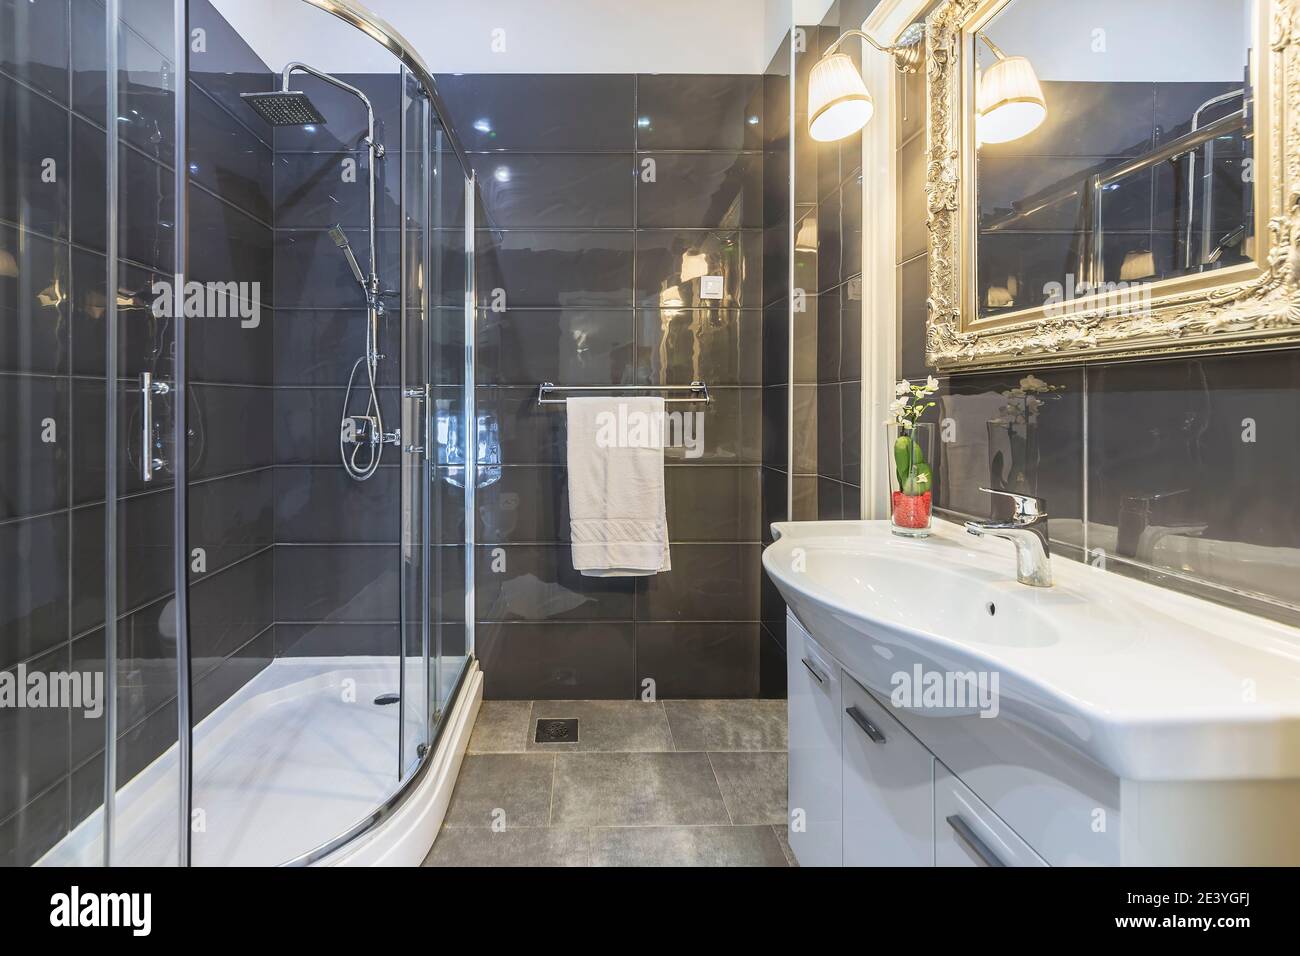 modern interior of clean bathroom with shower Stock Photo